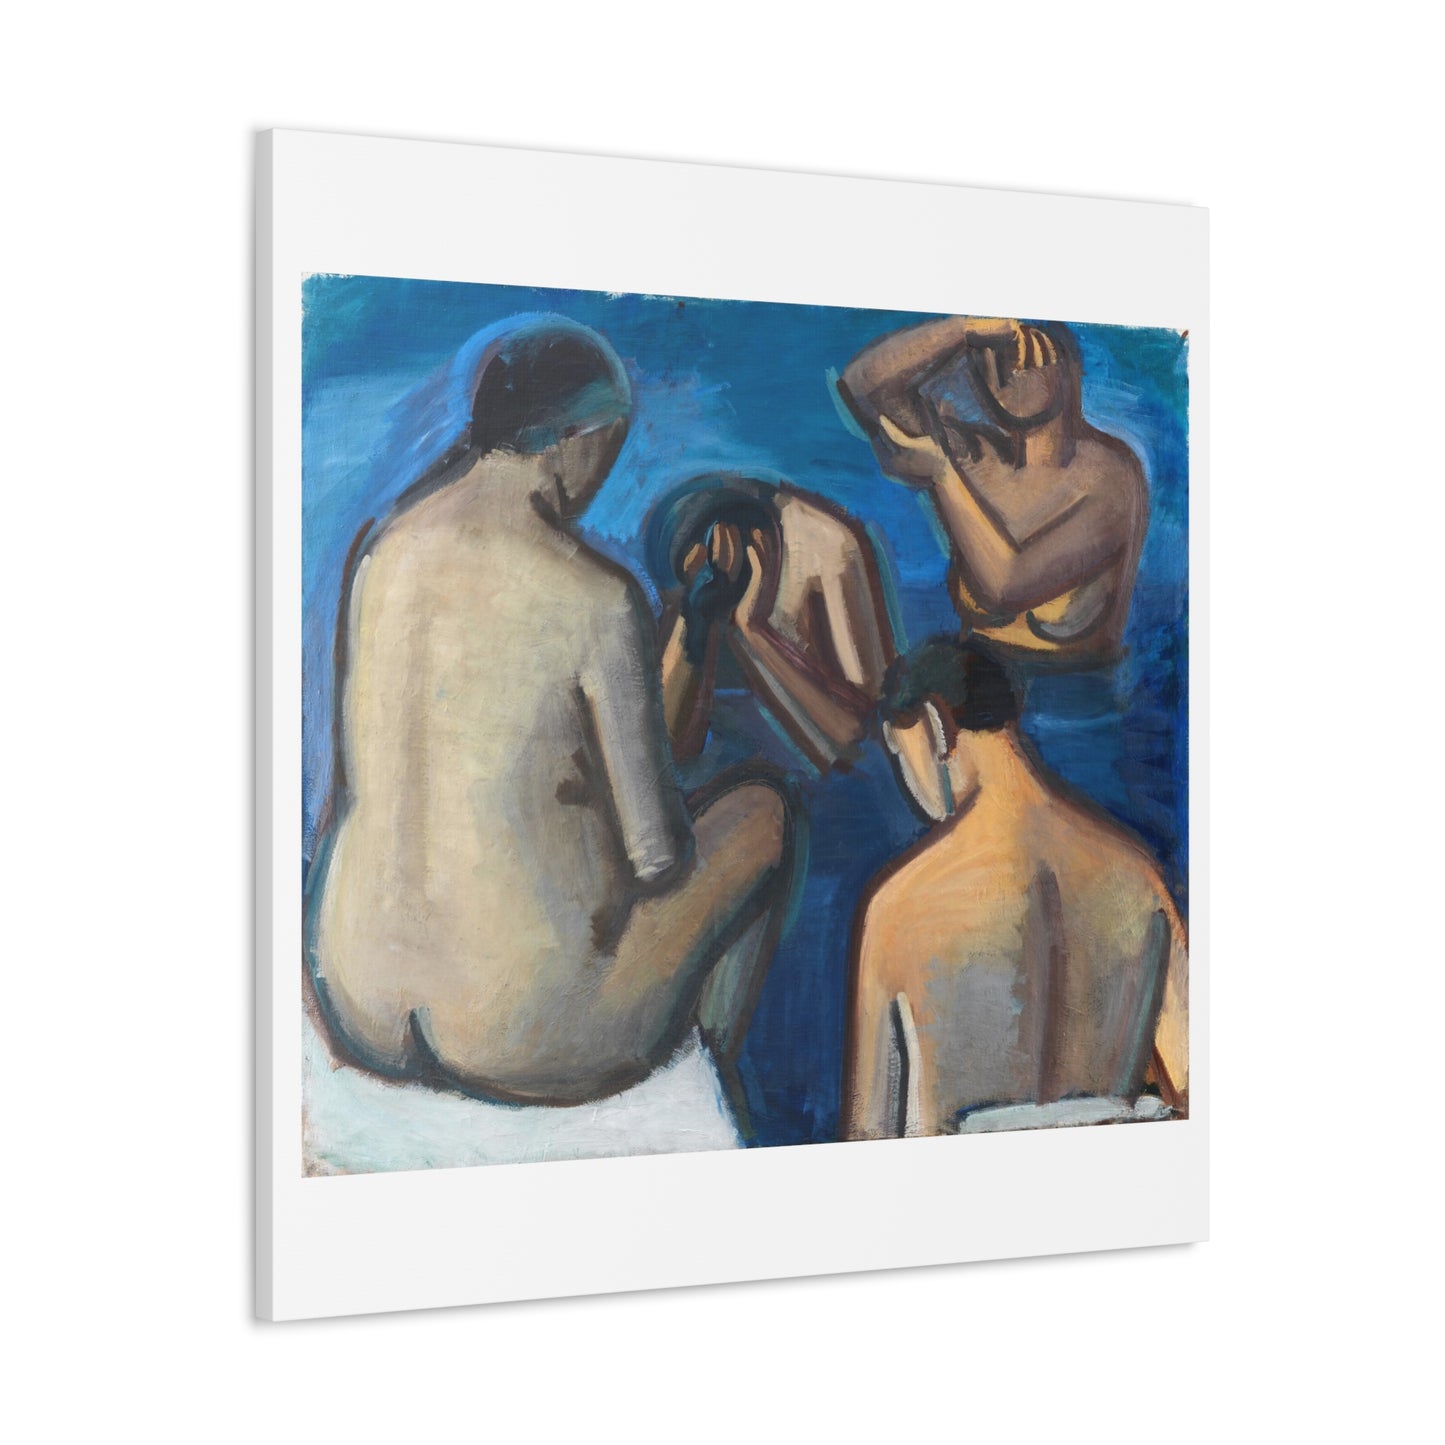 After the Bath (1924) by Vilhelm Lundstrom, Art Print from the Original on Satin Canvas